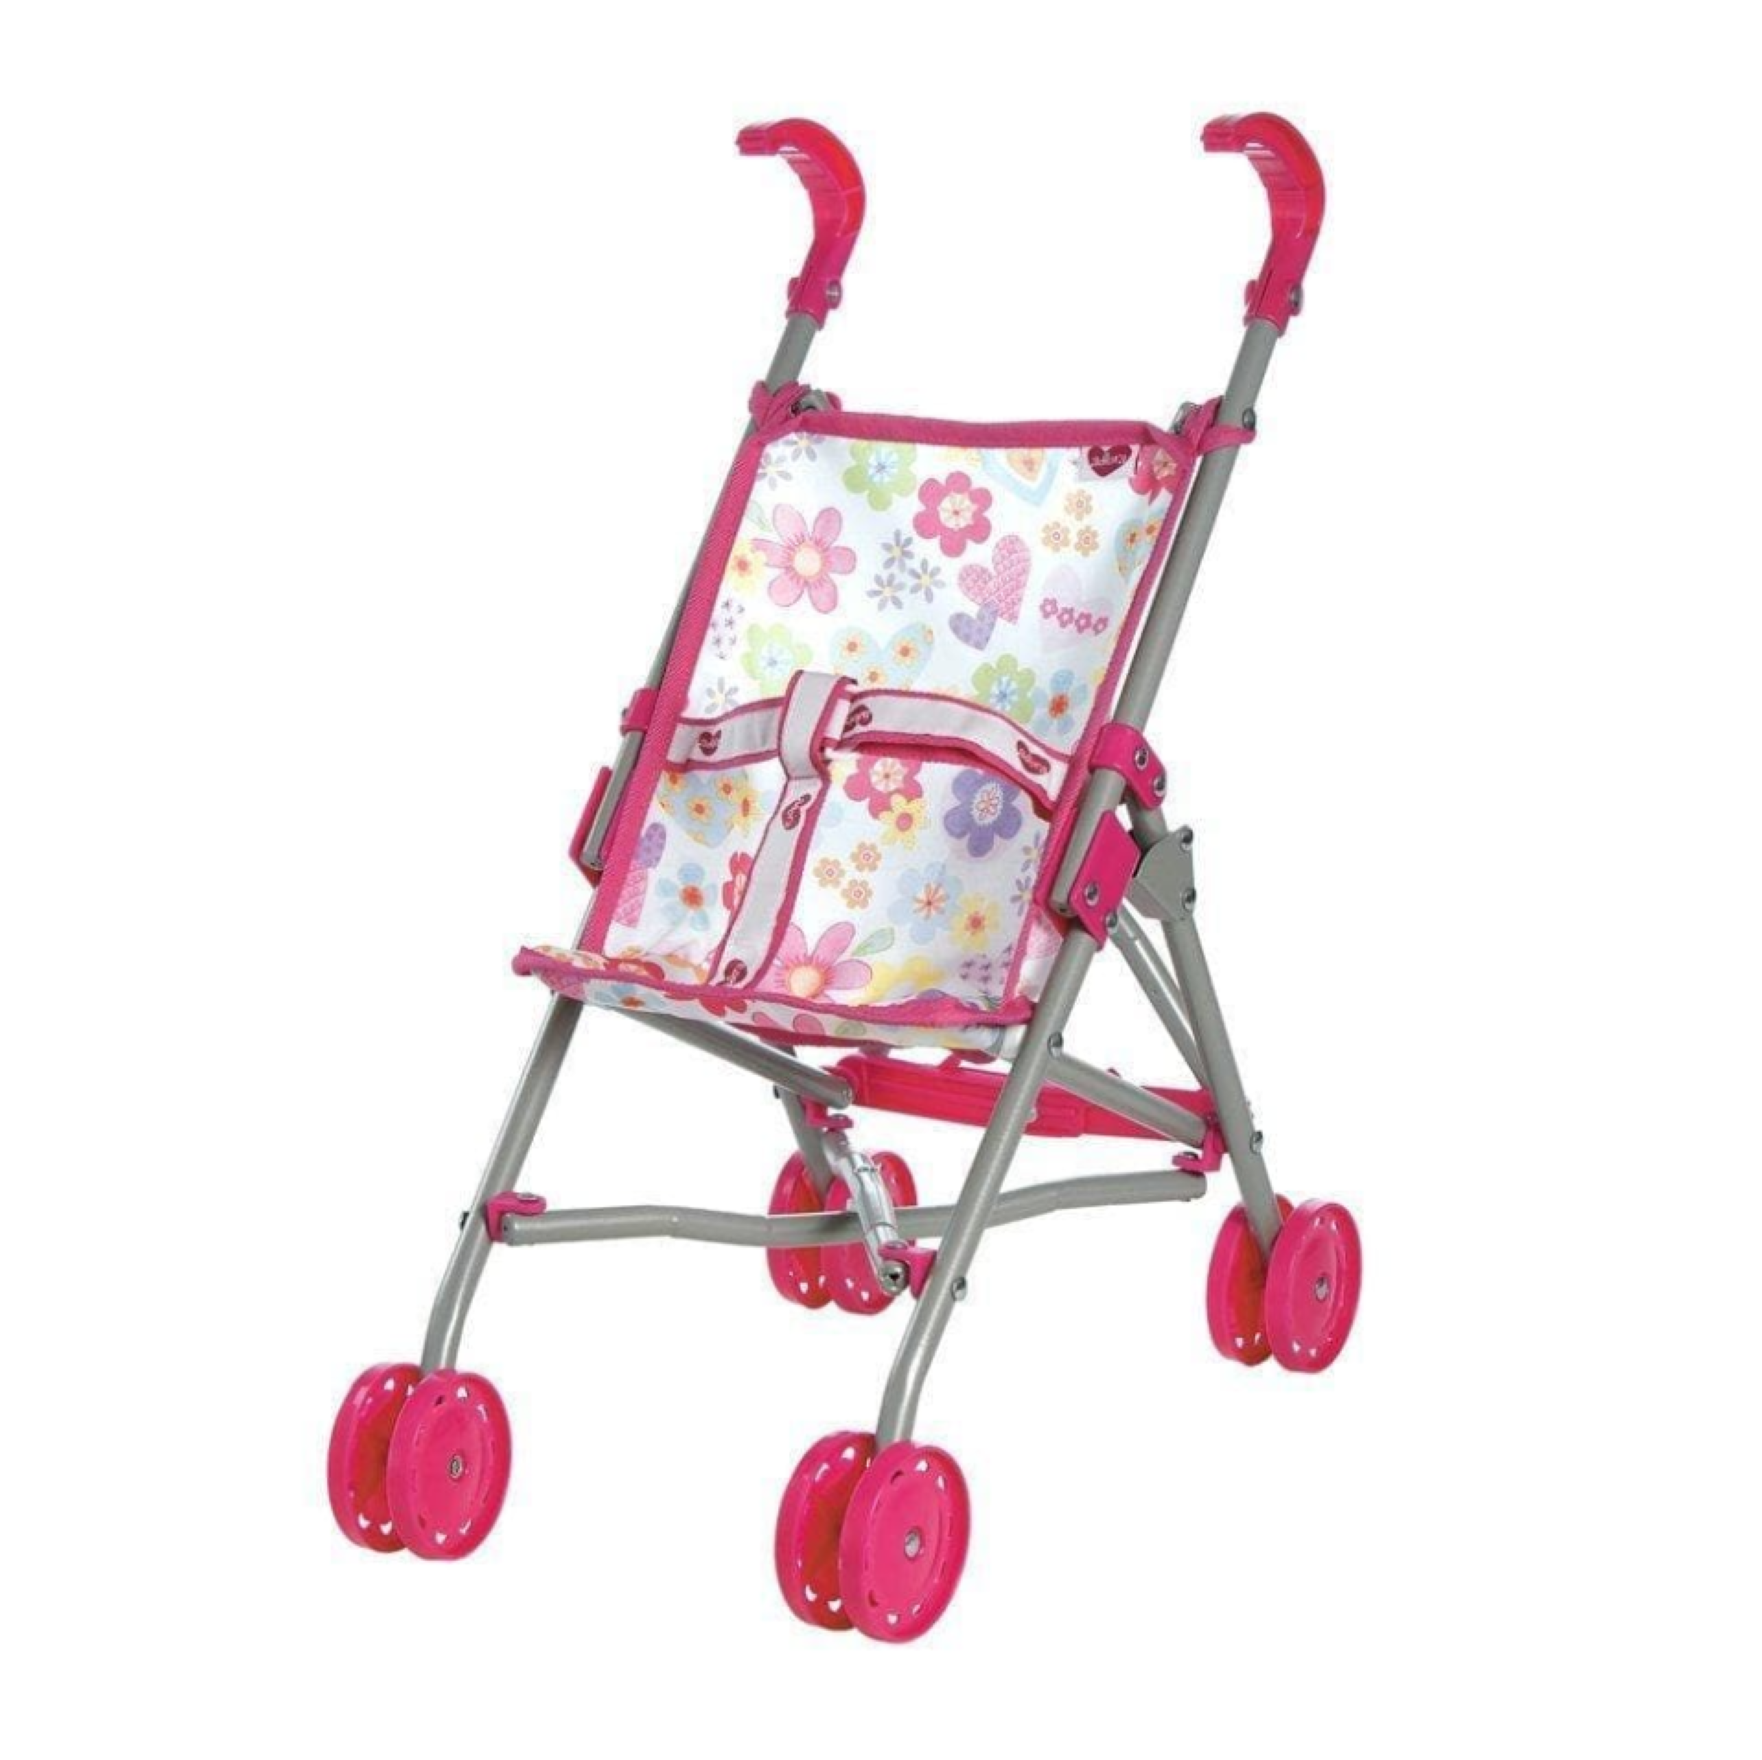 Adora Small Umbrella Stroller Pink Flowers fits up to 18" Cabbage Patch Kids